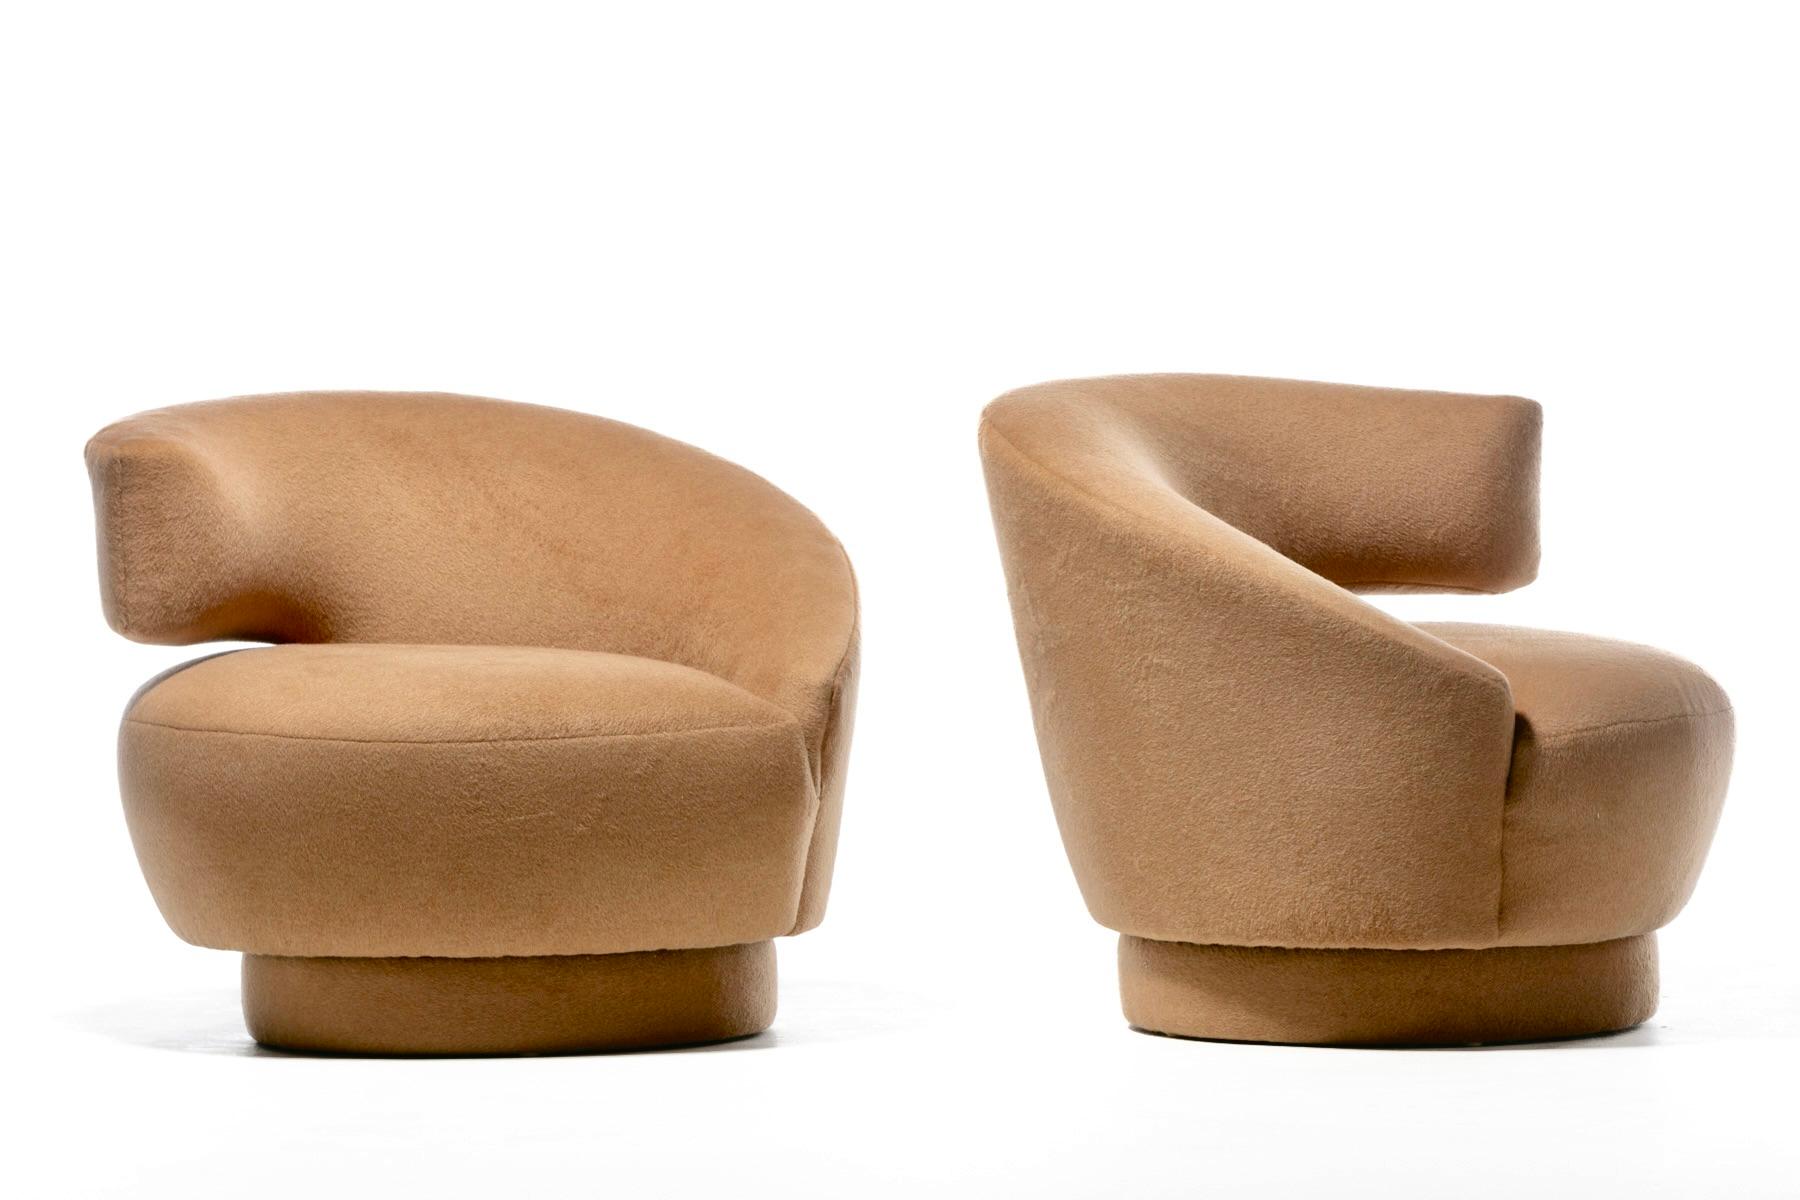 Vladimir Kagan Caterpillar Chairs Newly Upholstered in Camel Color Mohair For Sale 10